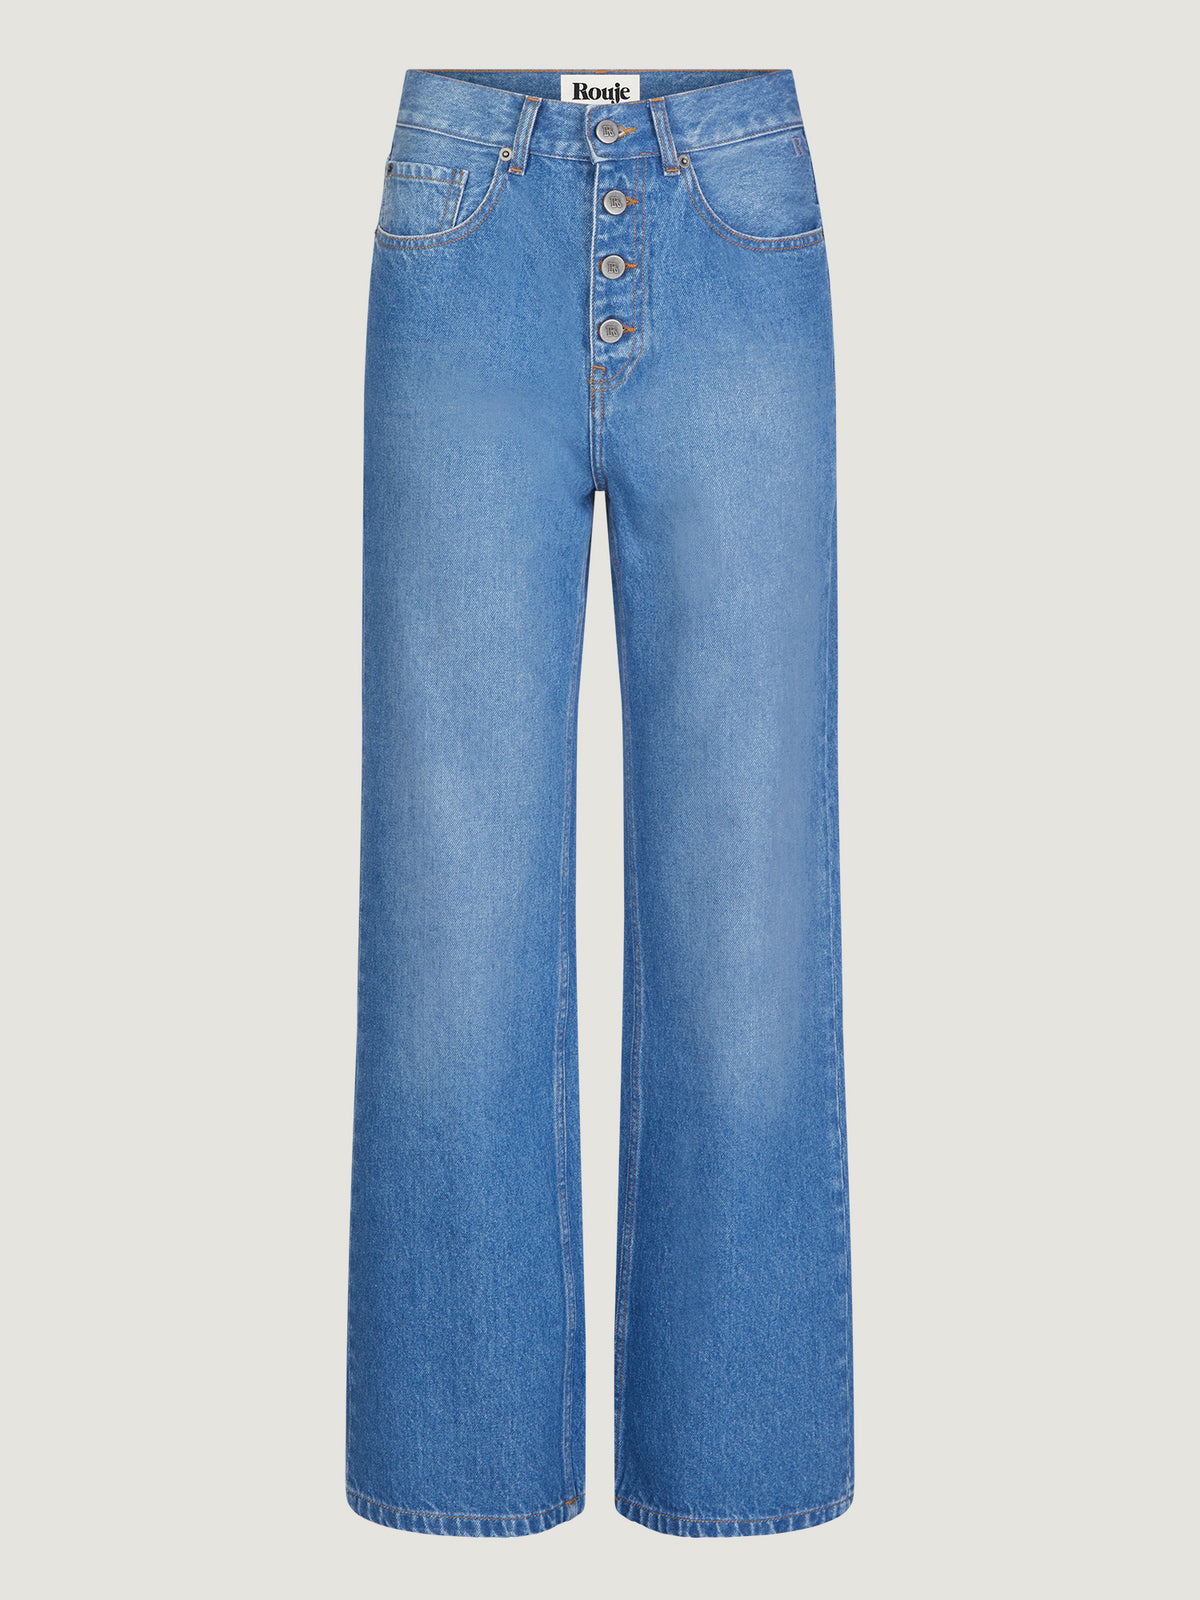 Long flare jeans with front pockets